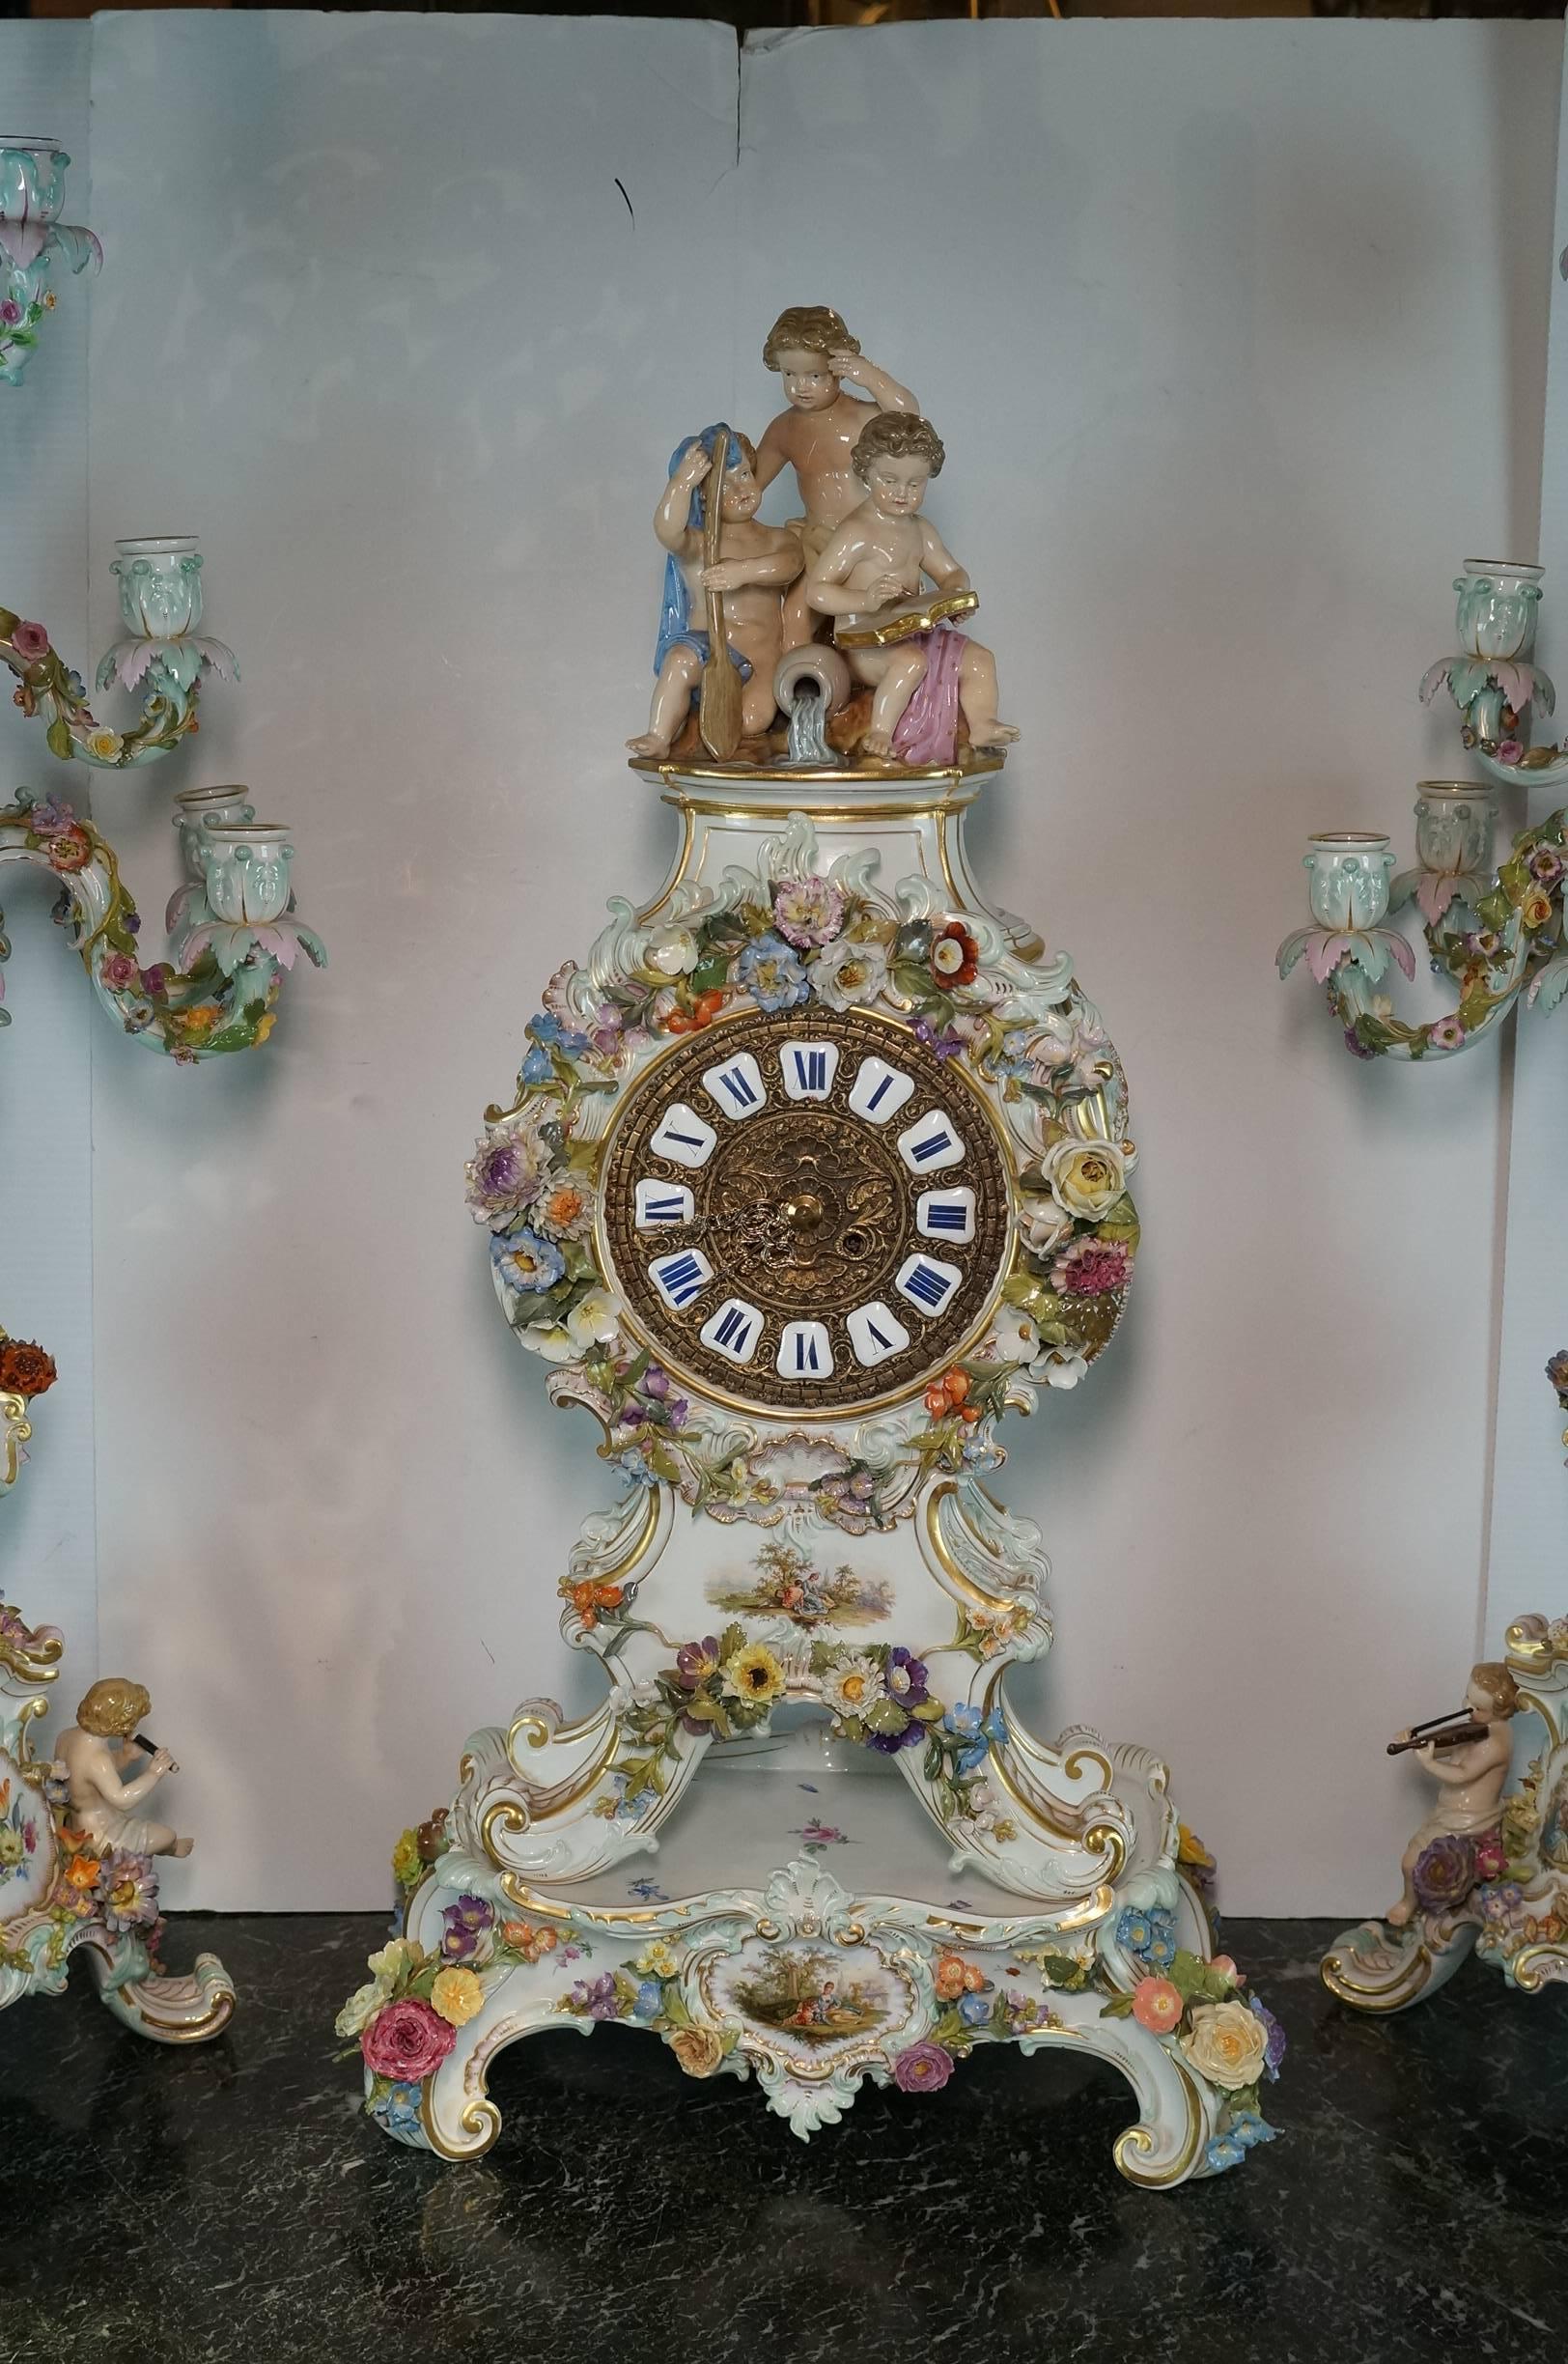 Late 19th Century Very Large Three-Piece Meissen Porcelain Figural Flower Encrusted Clock Set